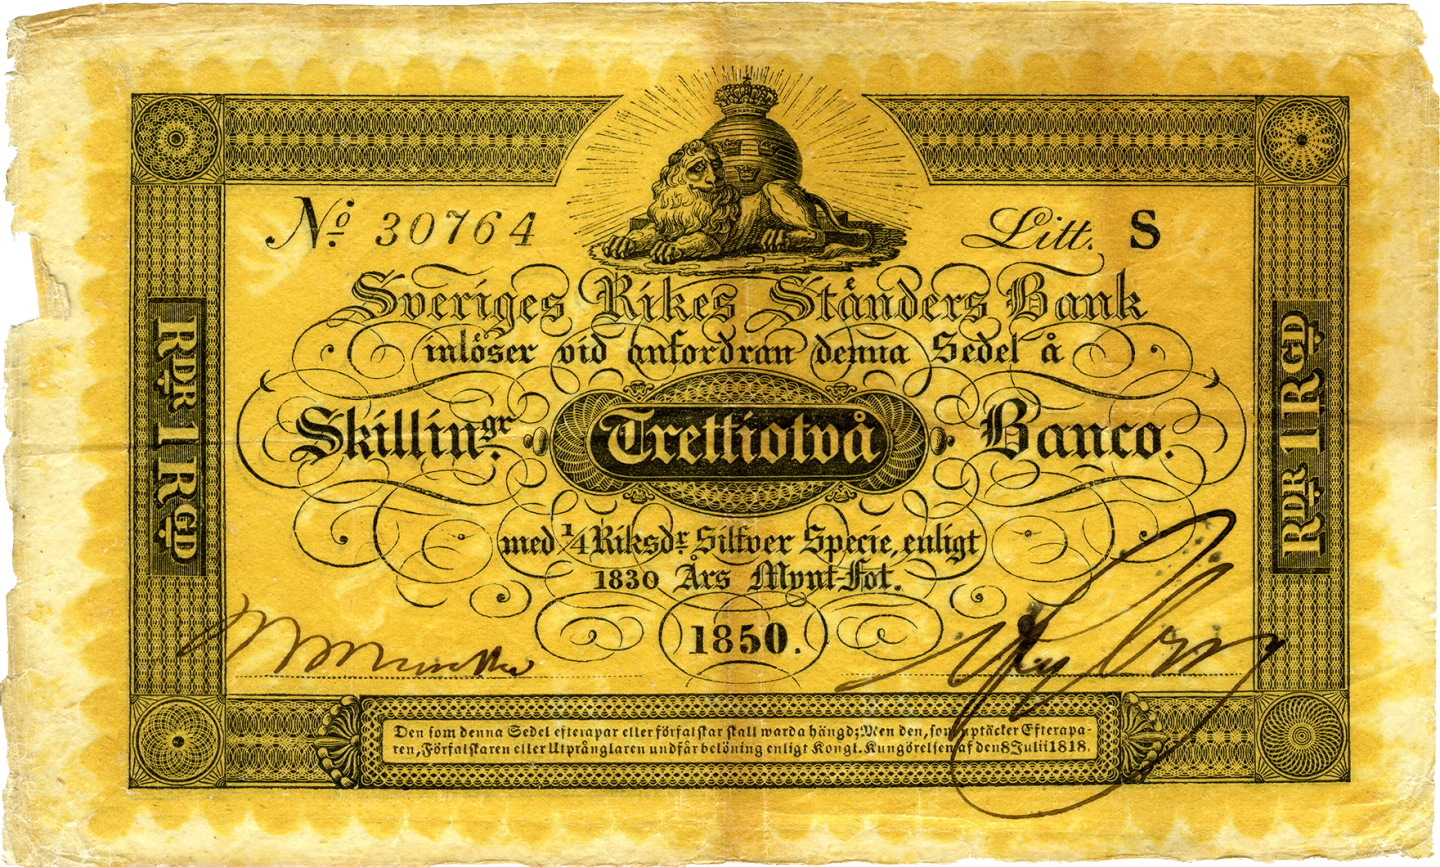 One of the first modern banknotes